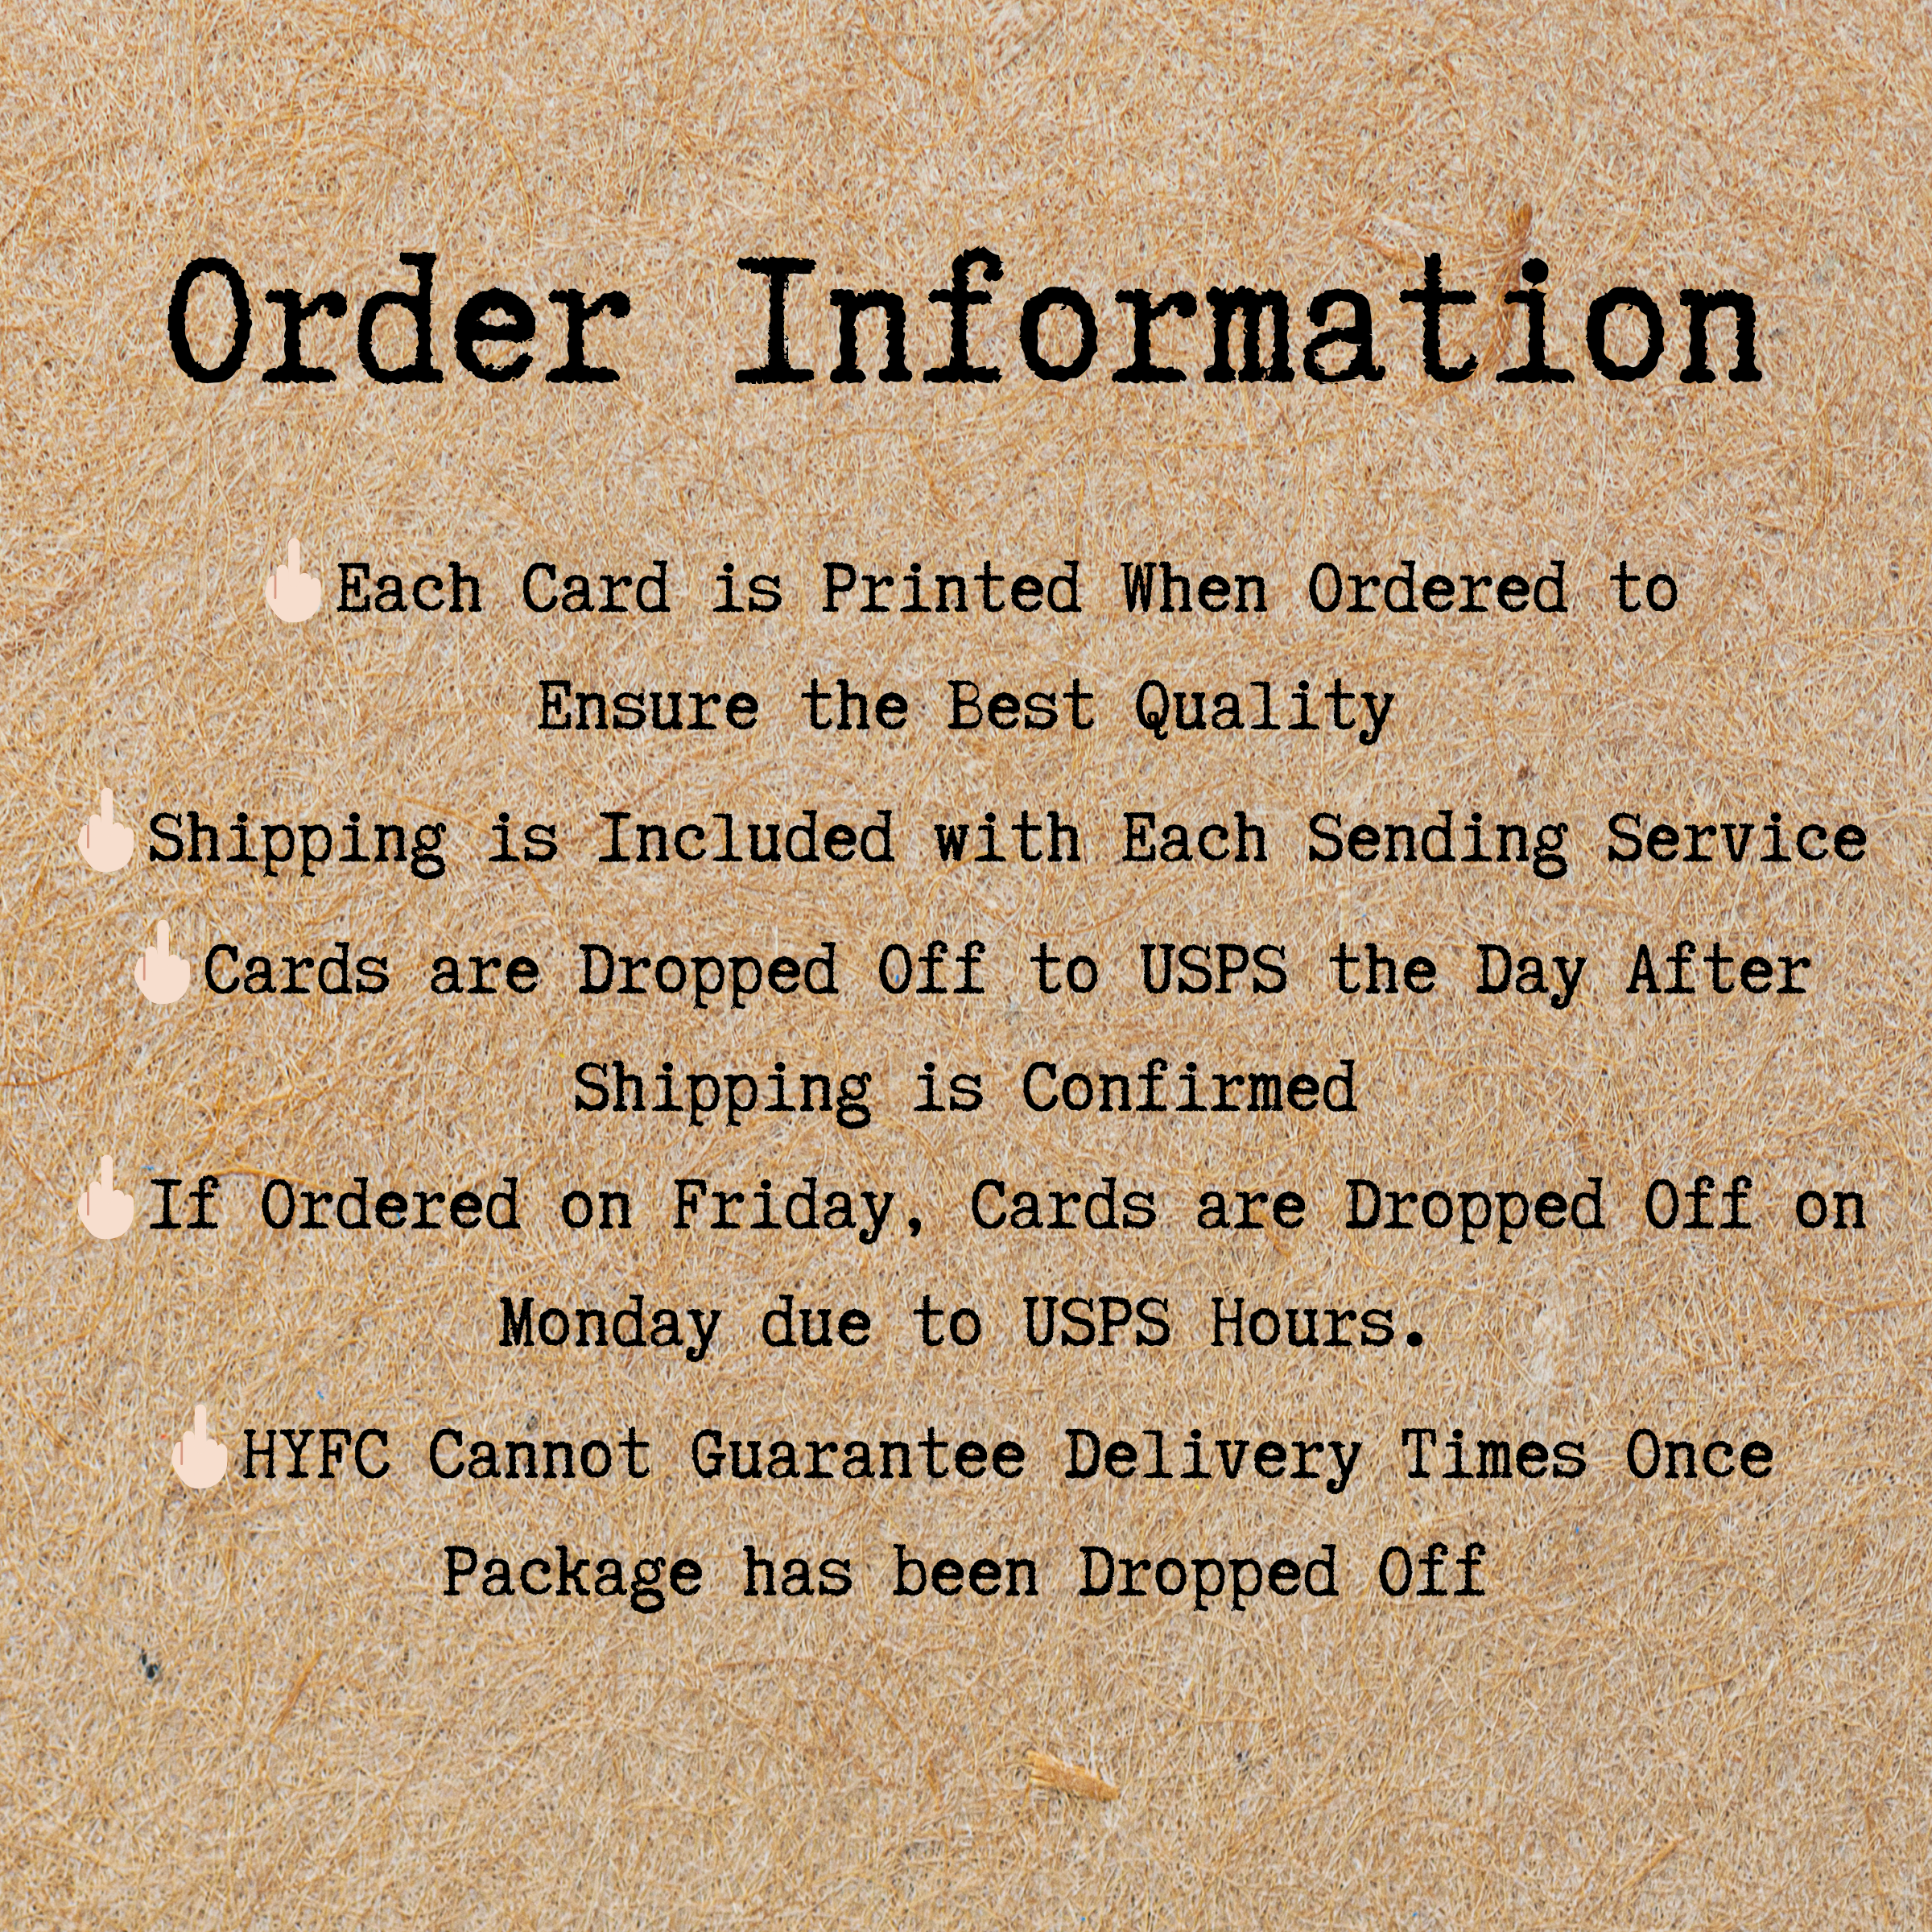 Greeting Card Order Information is found on this image